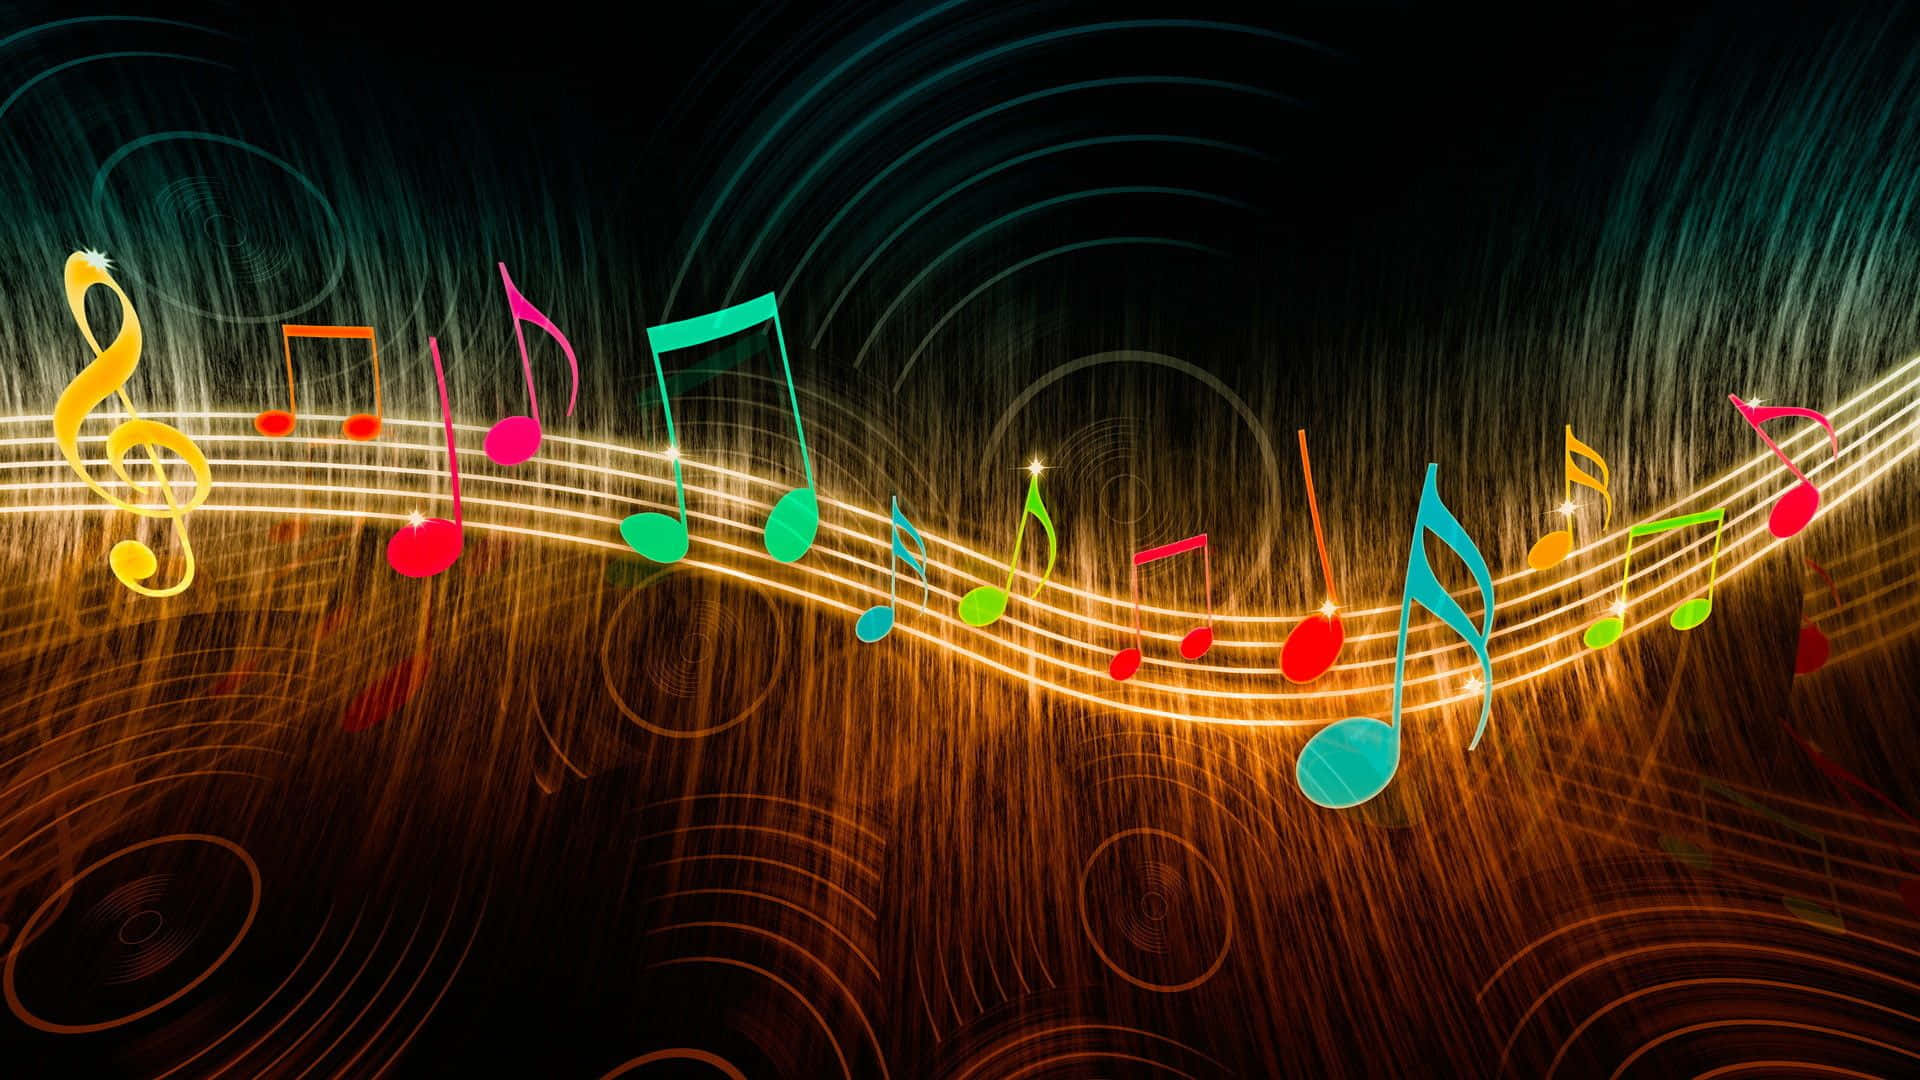 Feel the rhythm and sing your heart out with Pop Music. Wallpaper